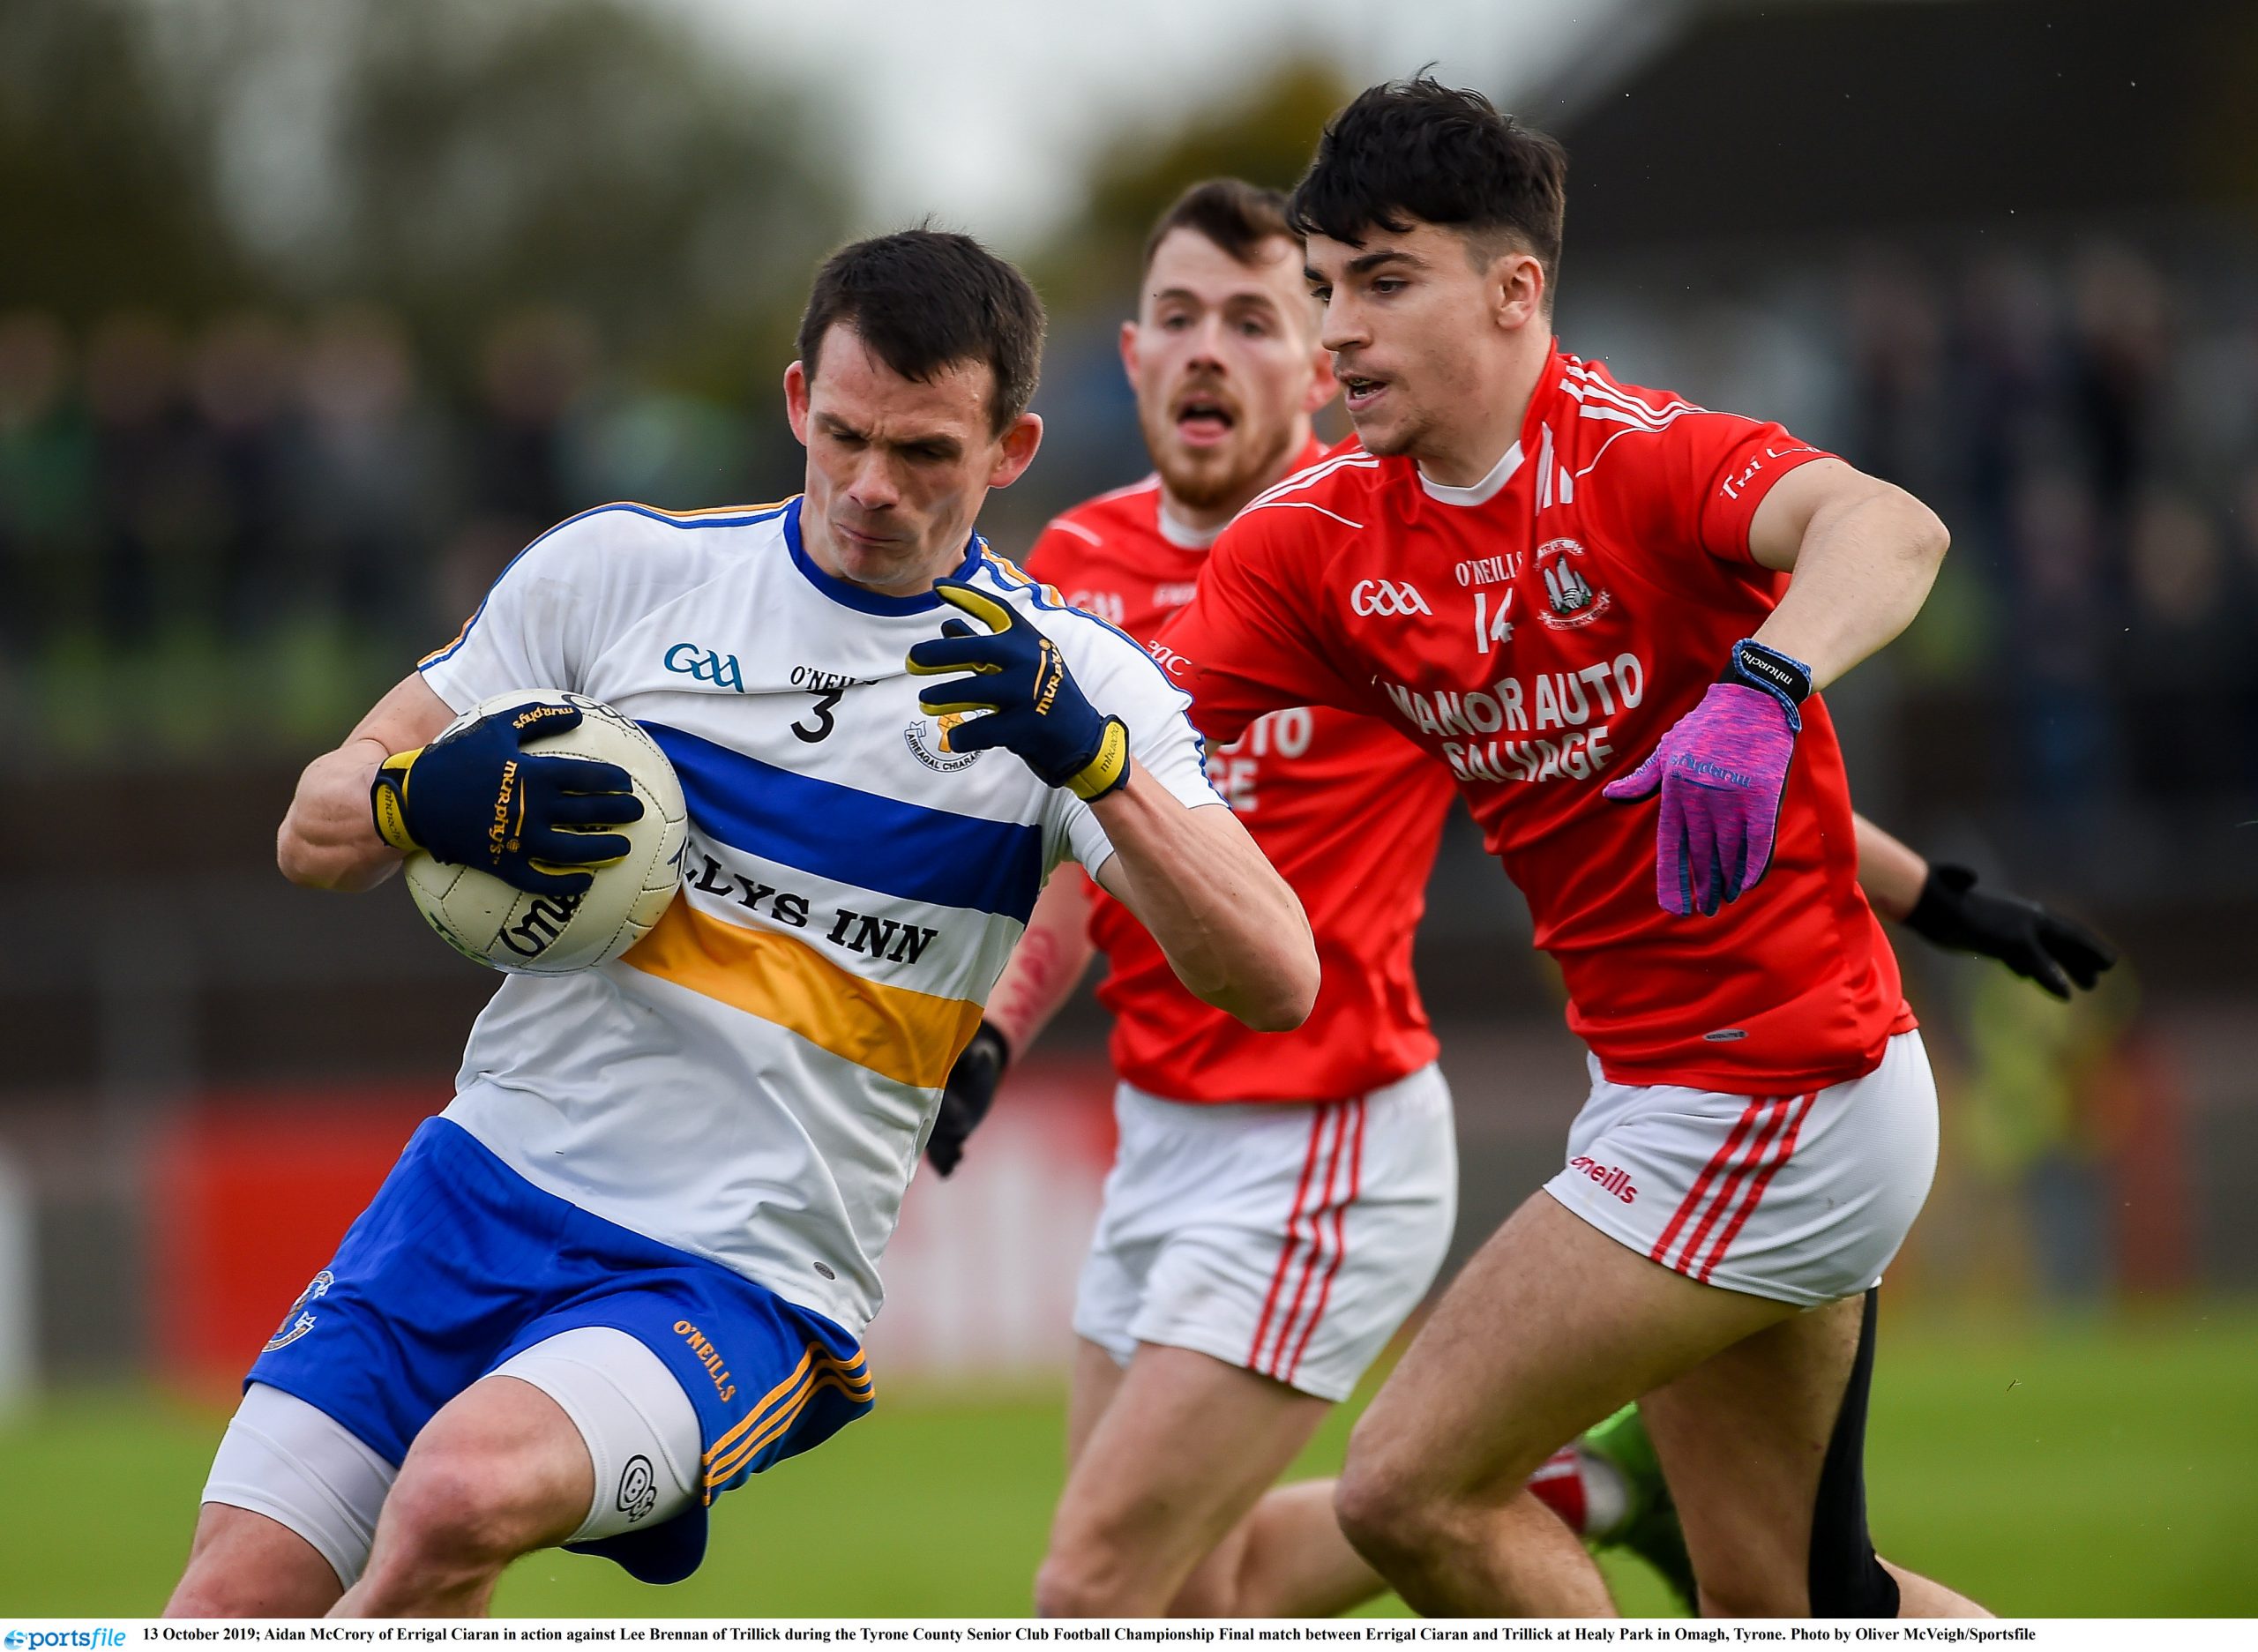 Tyrone club players would play behind closed doors